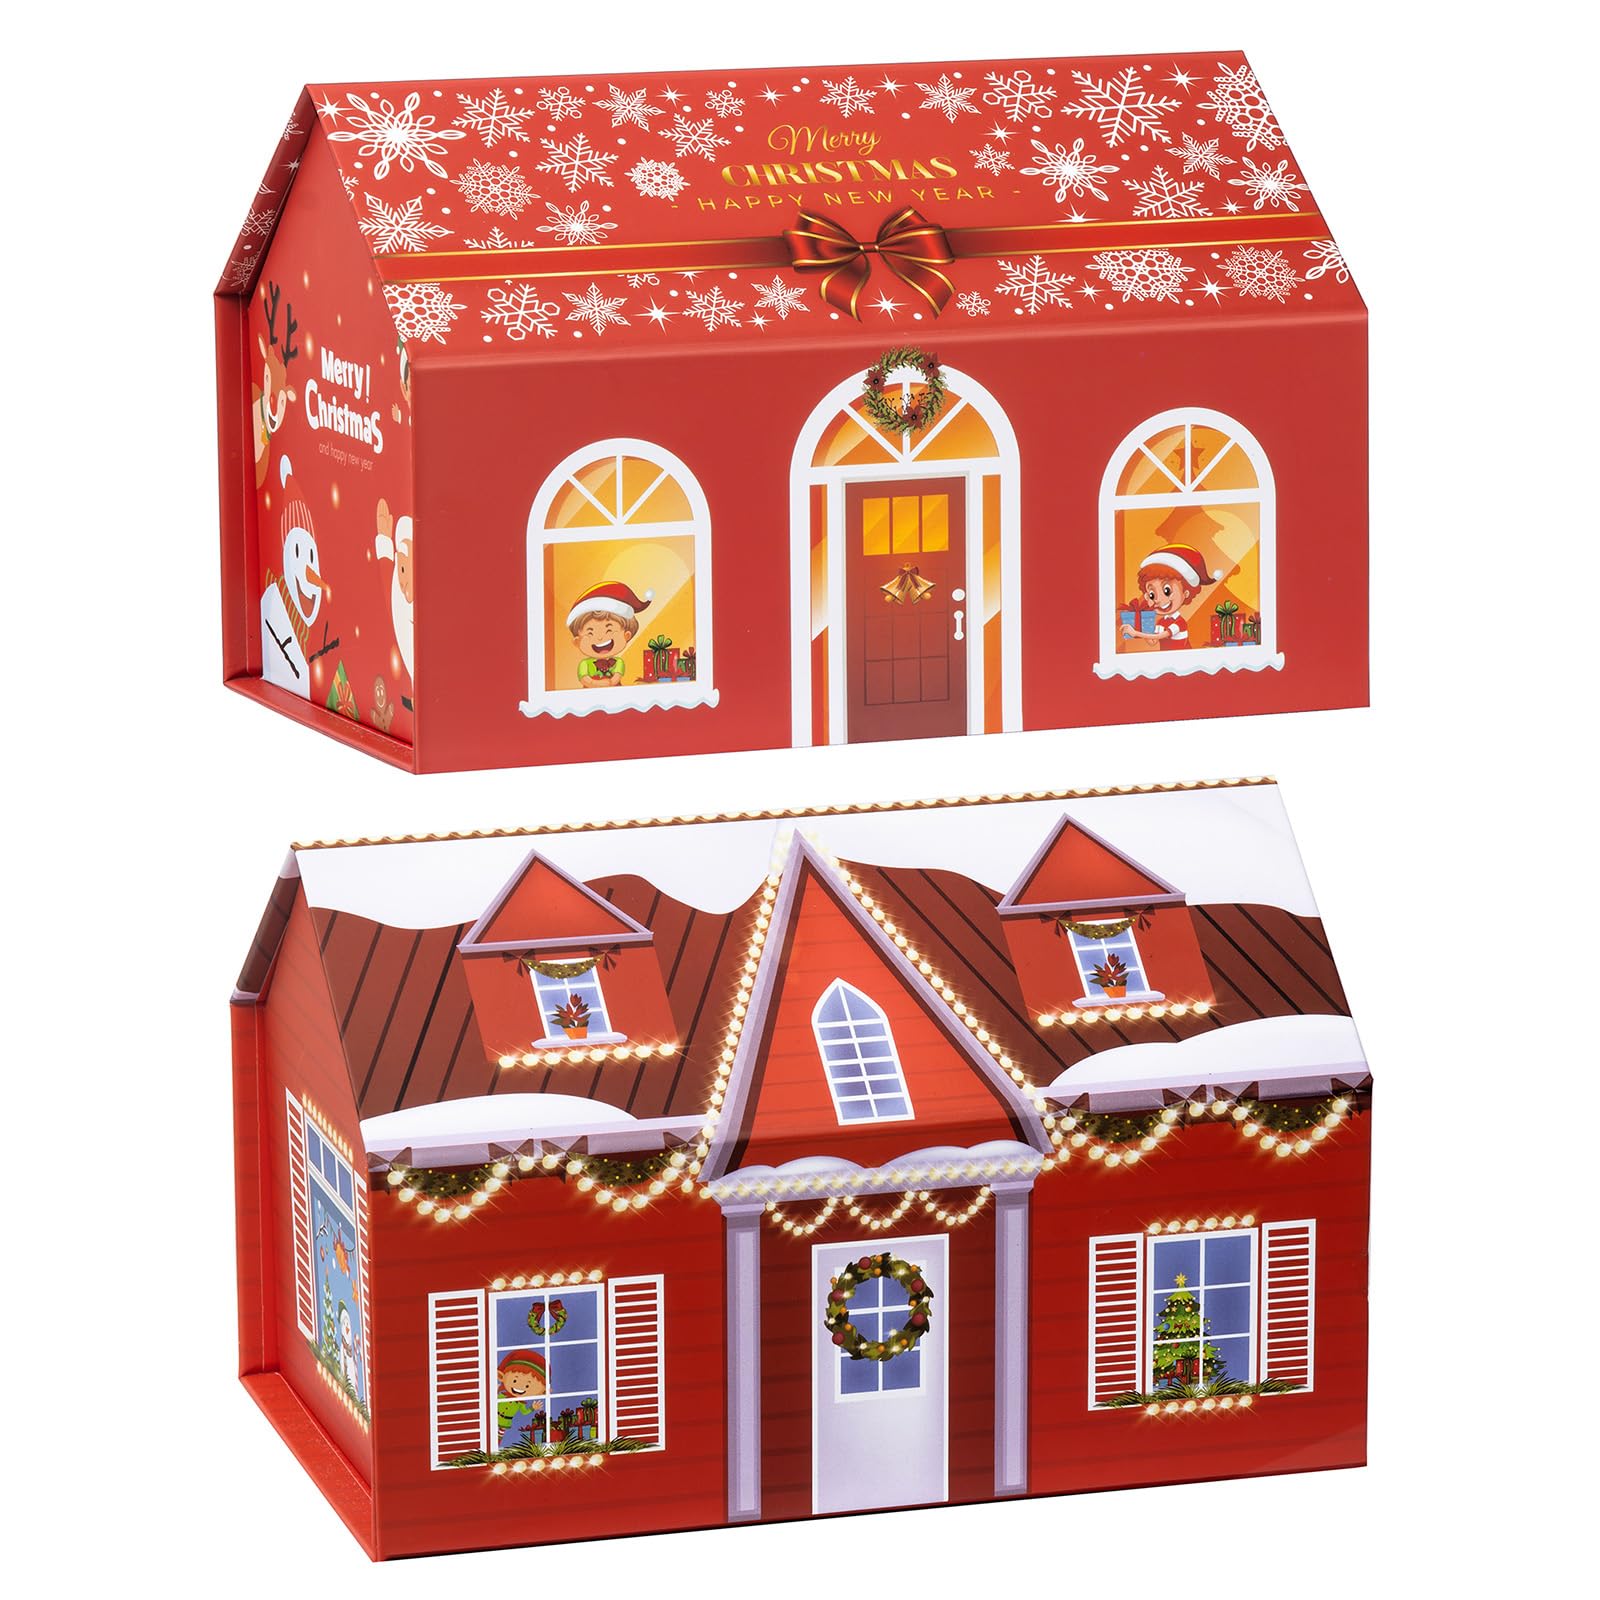 House Shape Christmas Gift Box with Magnetic Closure Lid Empty Gift Wrap Boxes for Xmas Day Eve New Year Presents Wrapping